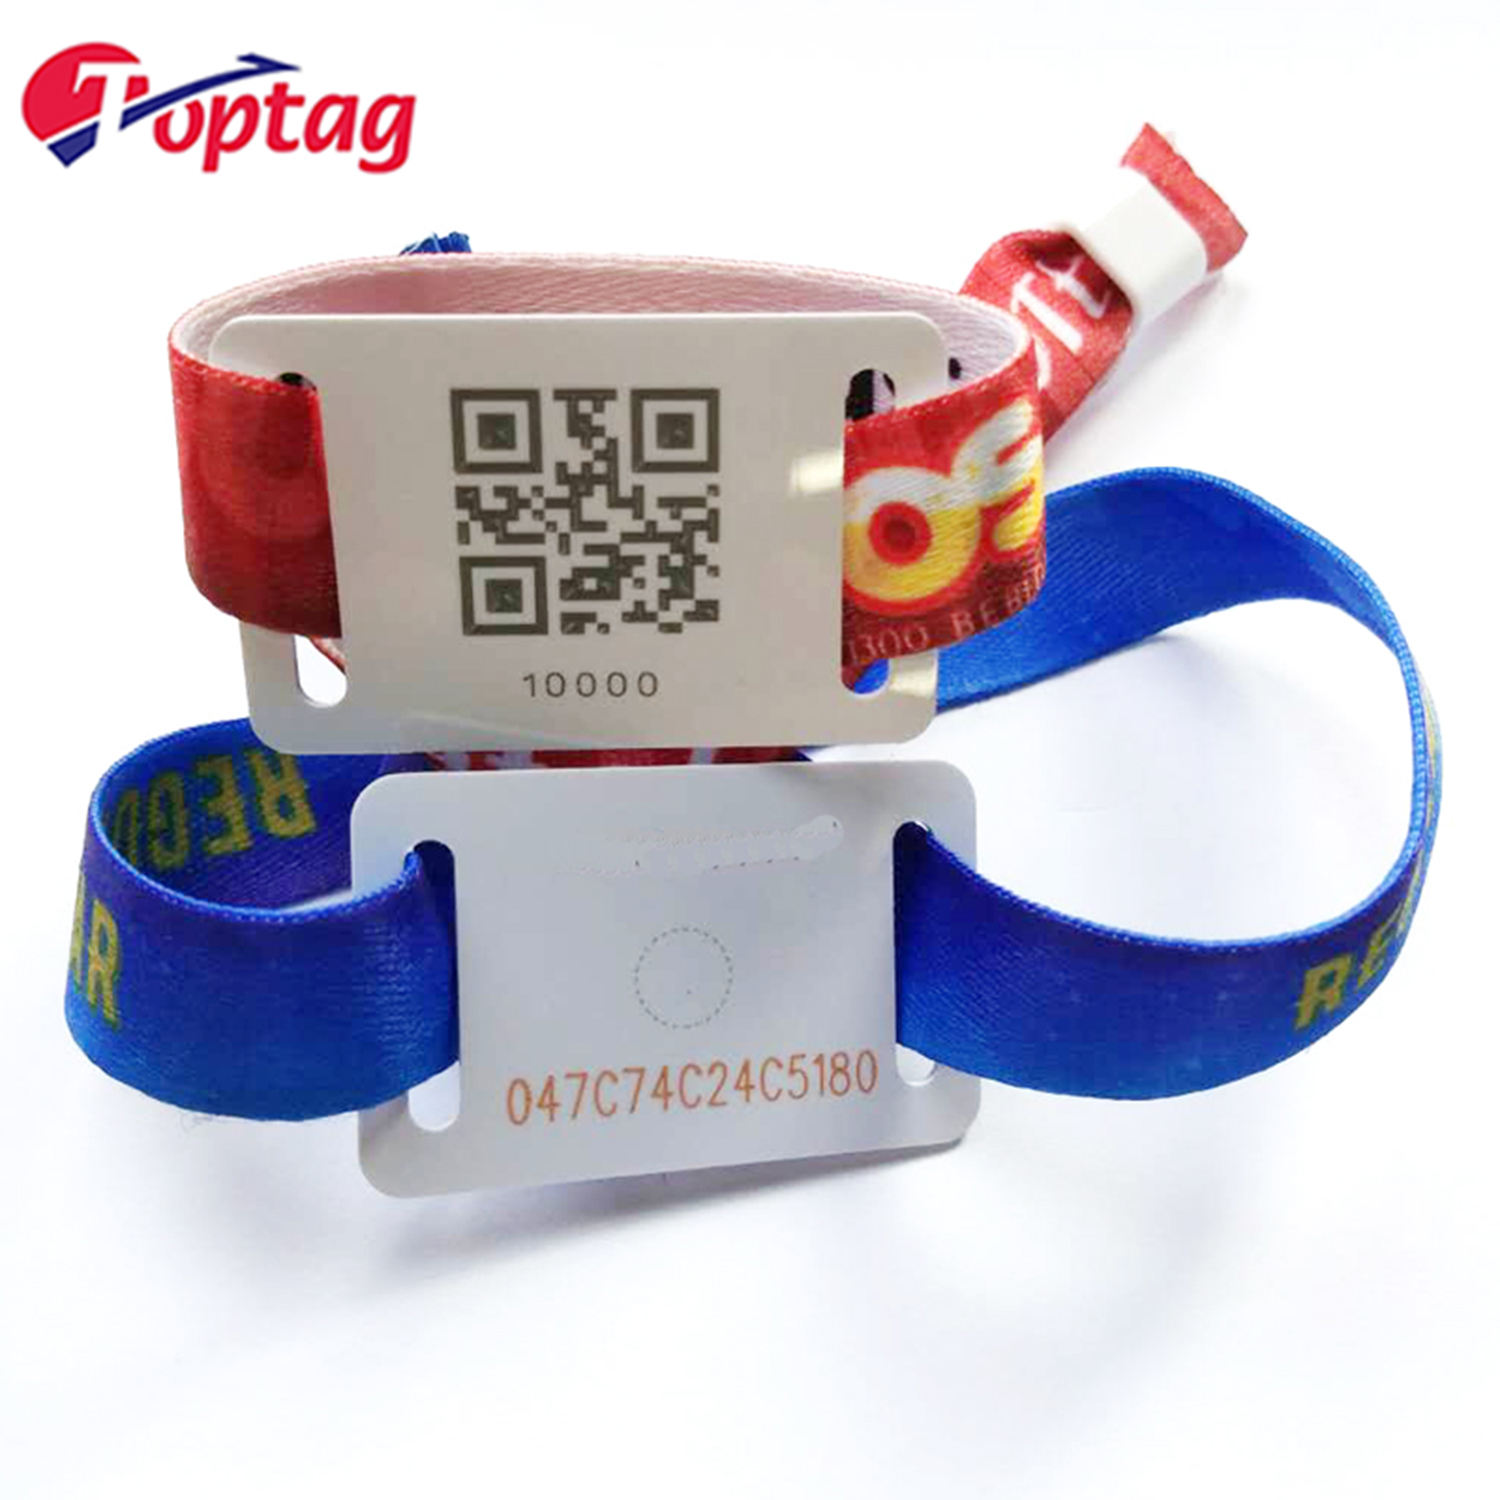 Fabric ID Bracelet 13.56MHz NFC RFID Woven Wristband with QR code